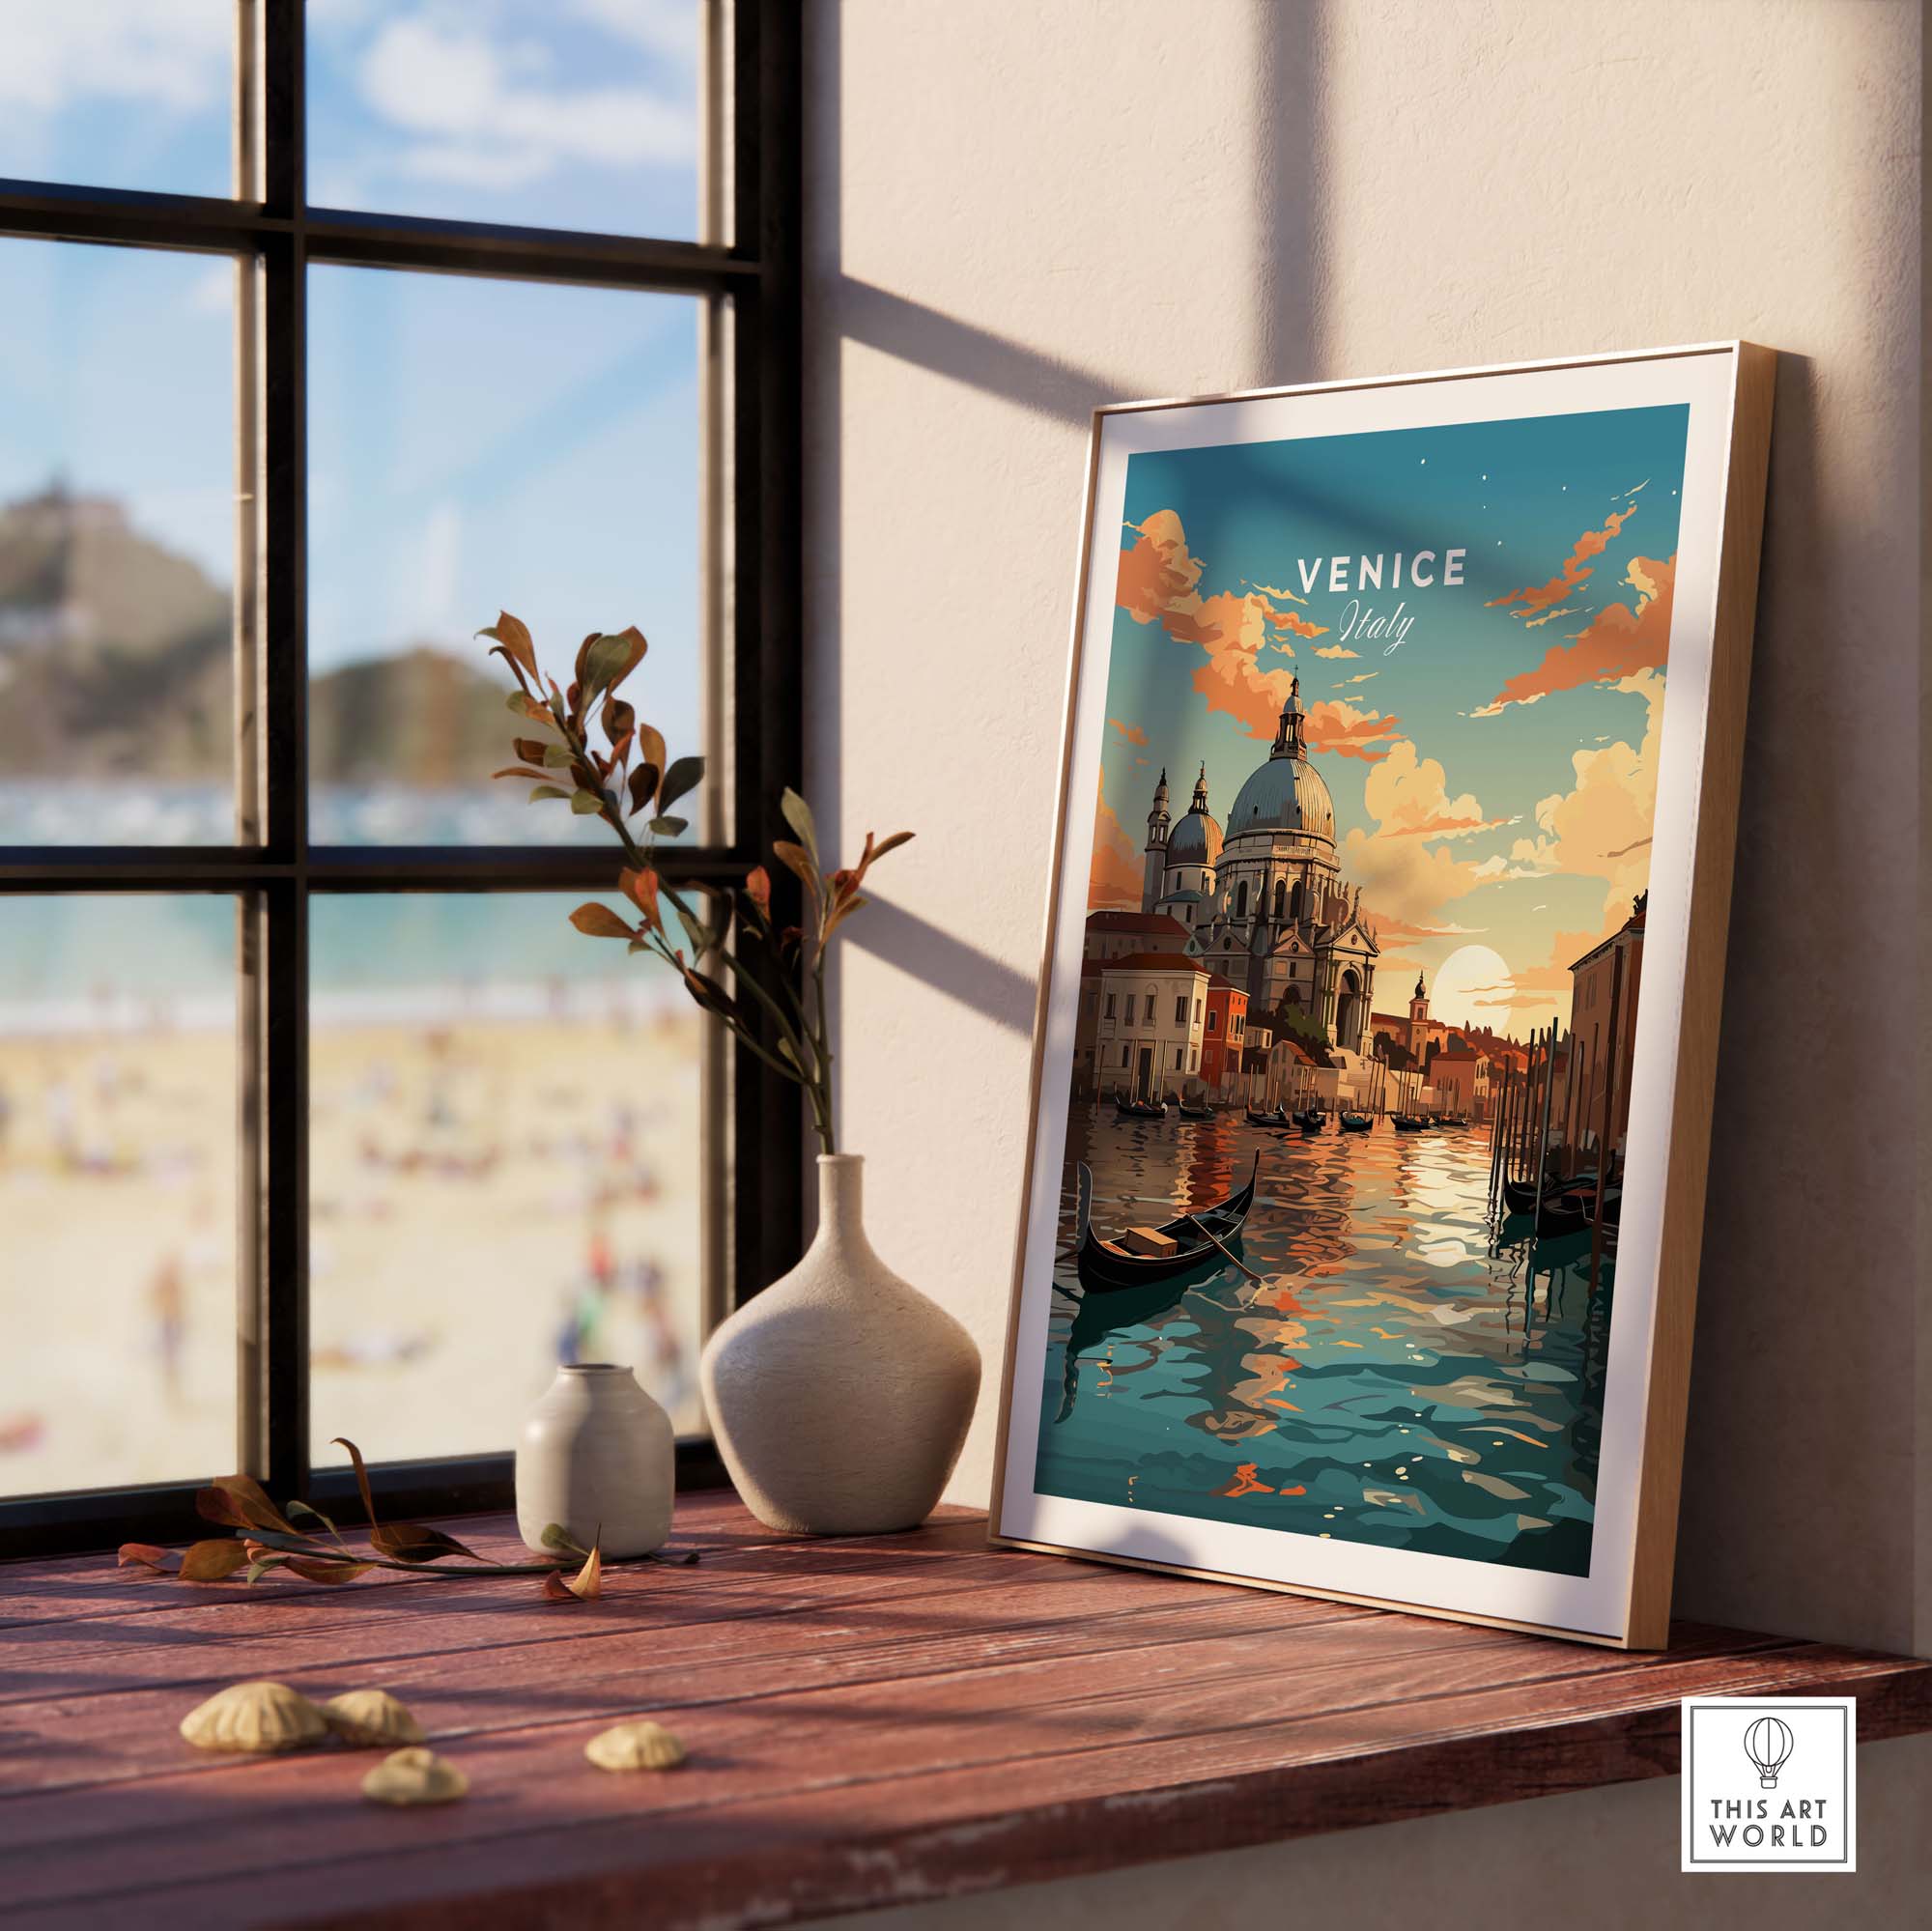 Stunning vintage travel poster of Venice canals at sunset in a framed resting on a windowsill